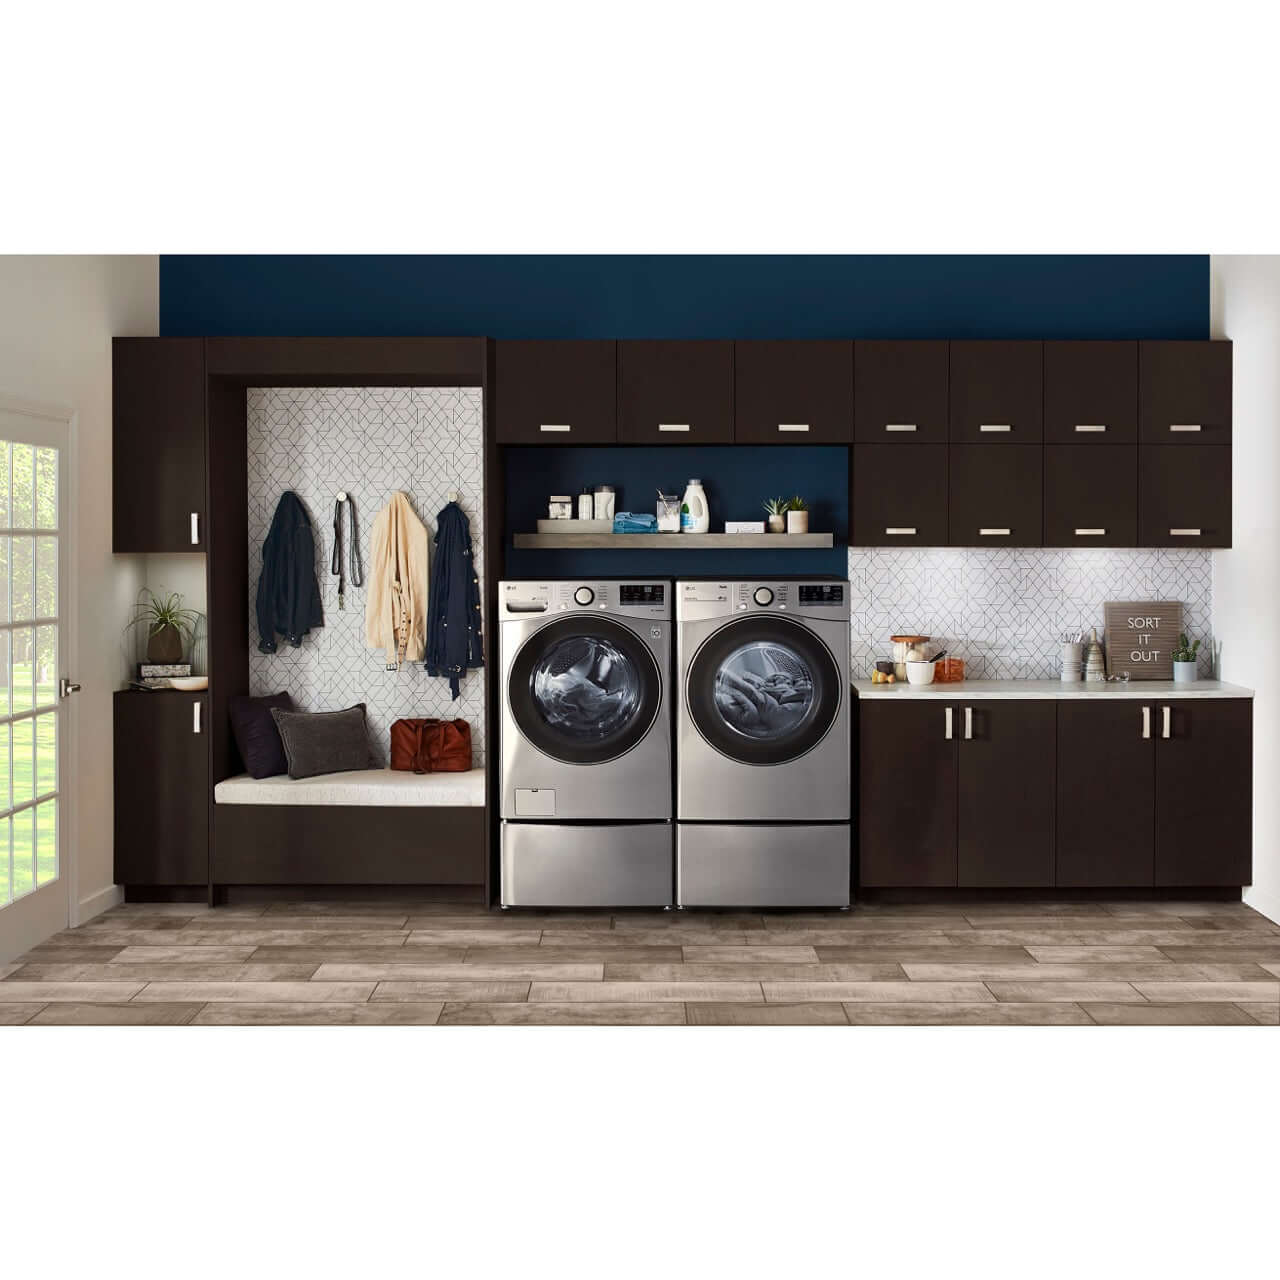 LG 27 In. 4.5-Cu. Ft. Front Load Washer with Steam Technology in Graphite Steel (WM3600HVA)